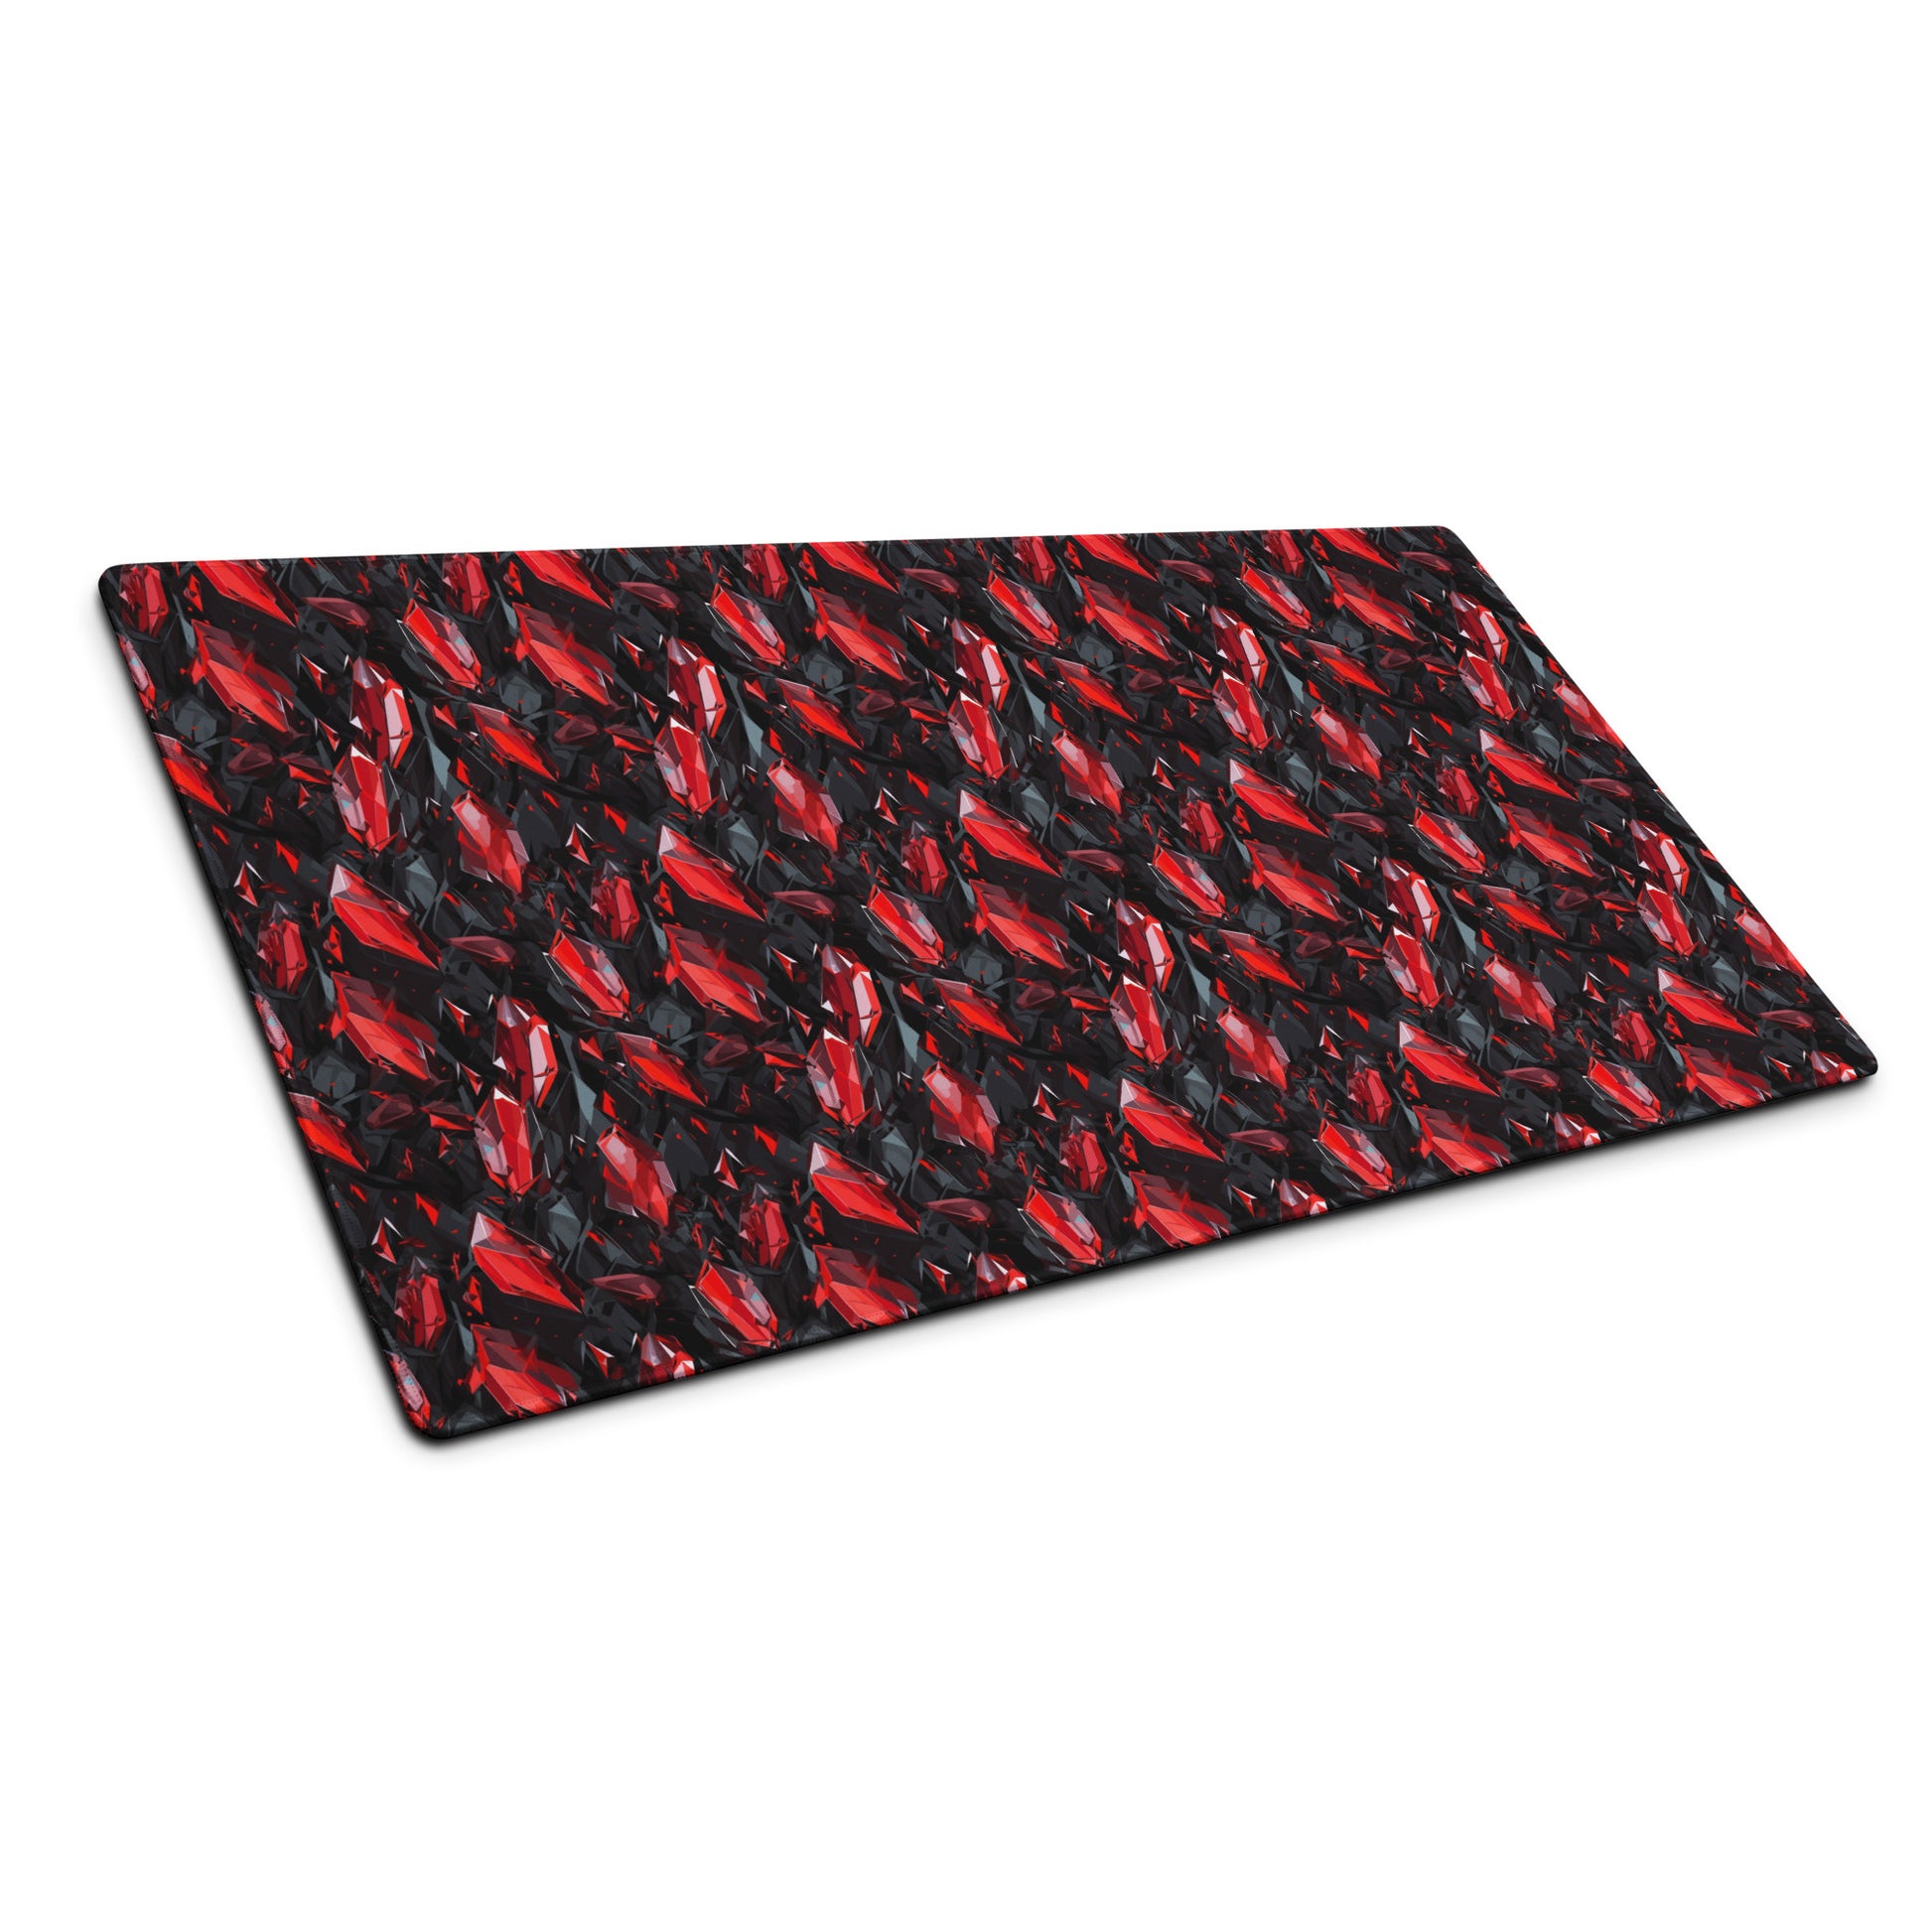 A 36" x 18" gaming desk pad with black and red crystals sitting at an angle.